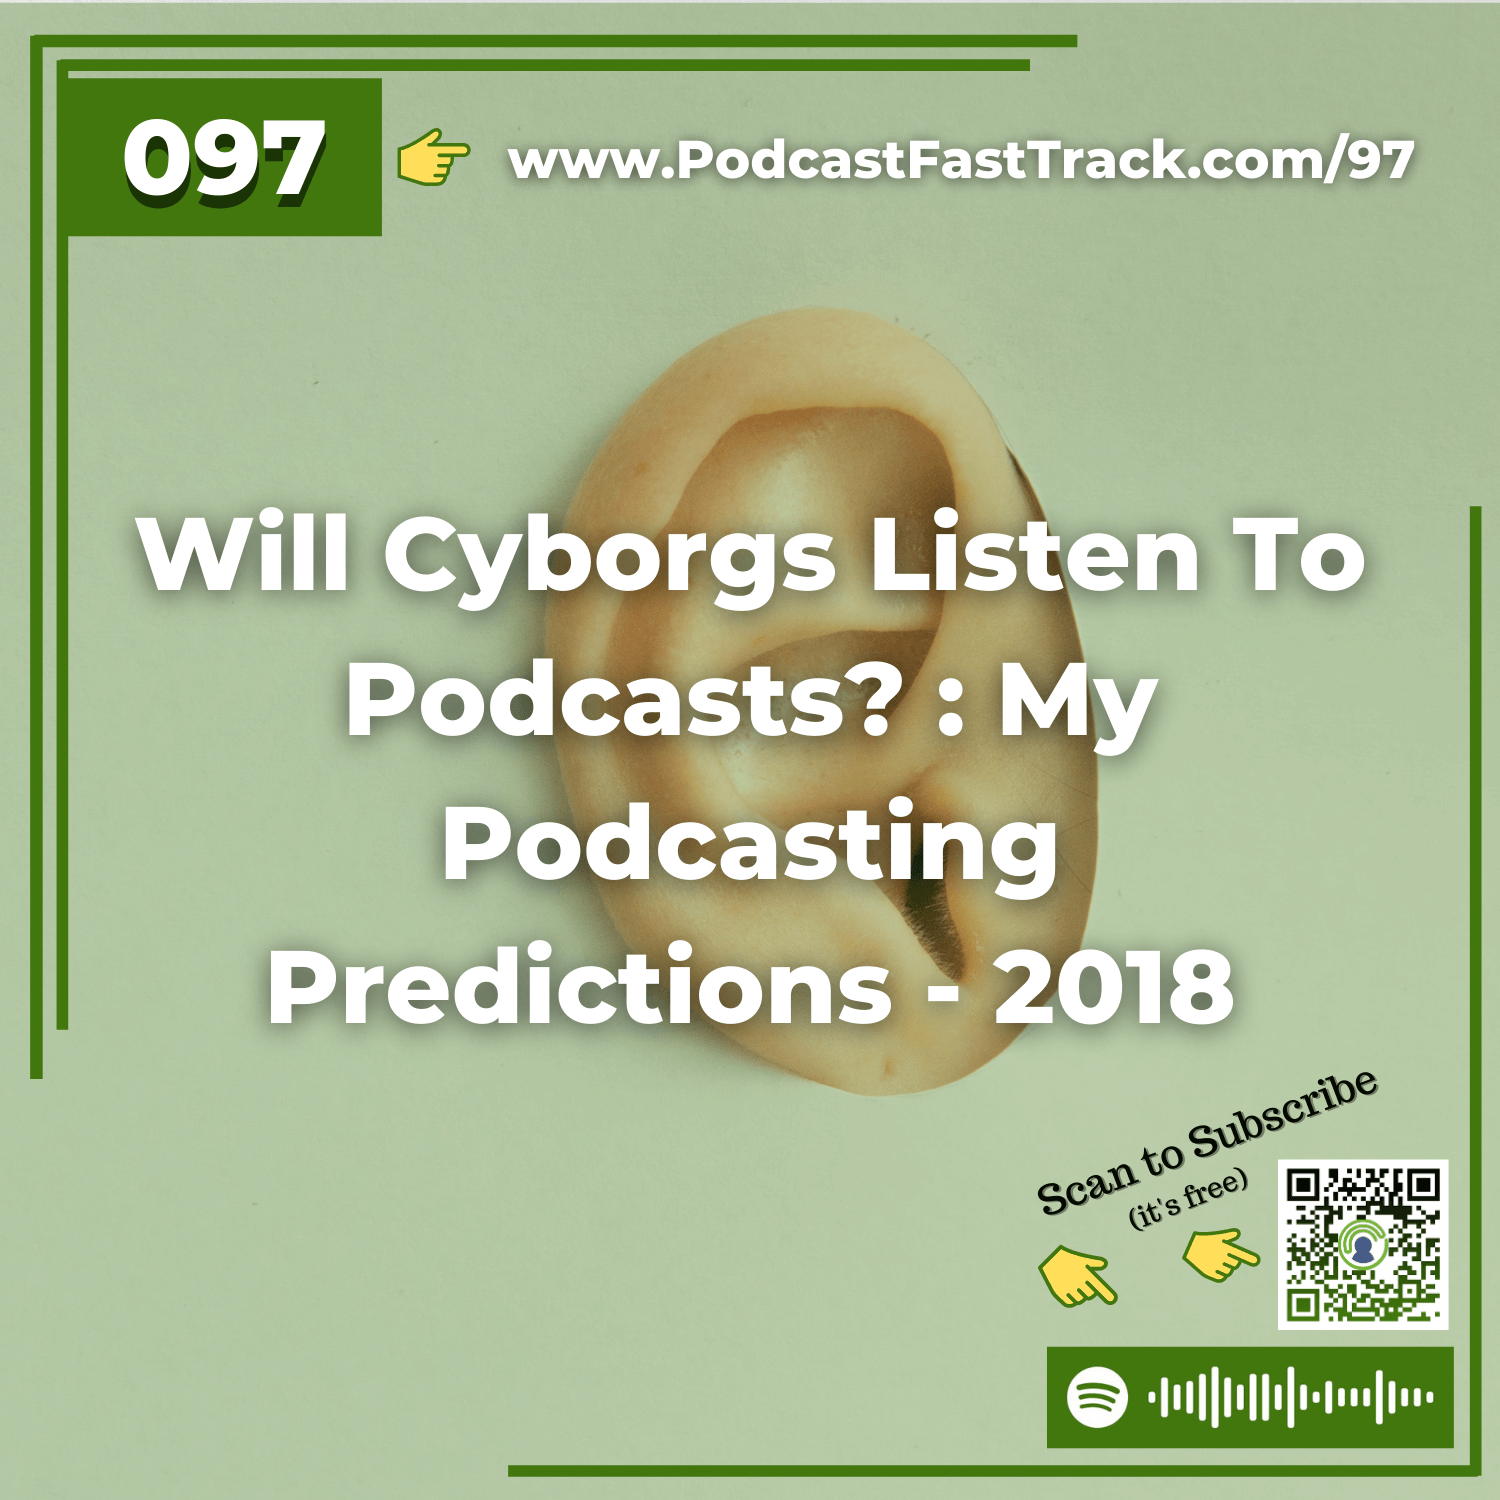 97 Will Cyborgs Listen To Podcasts My Podcasting Predictions - 2018